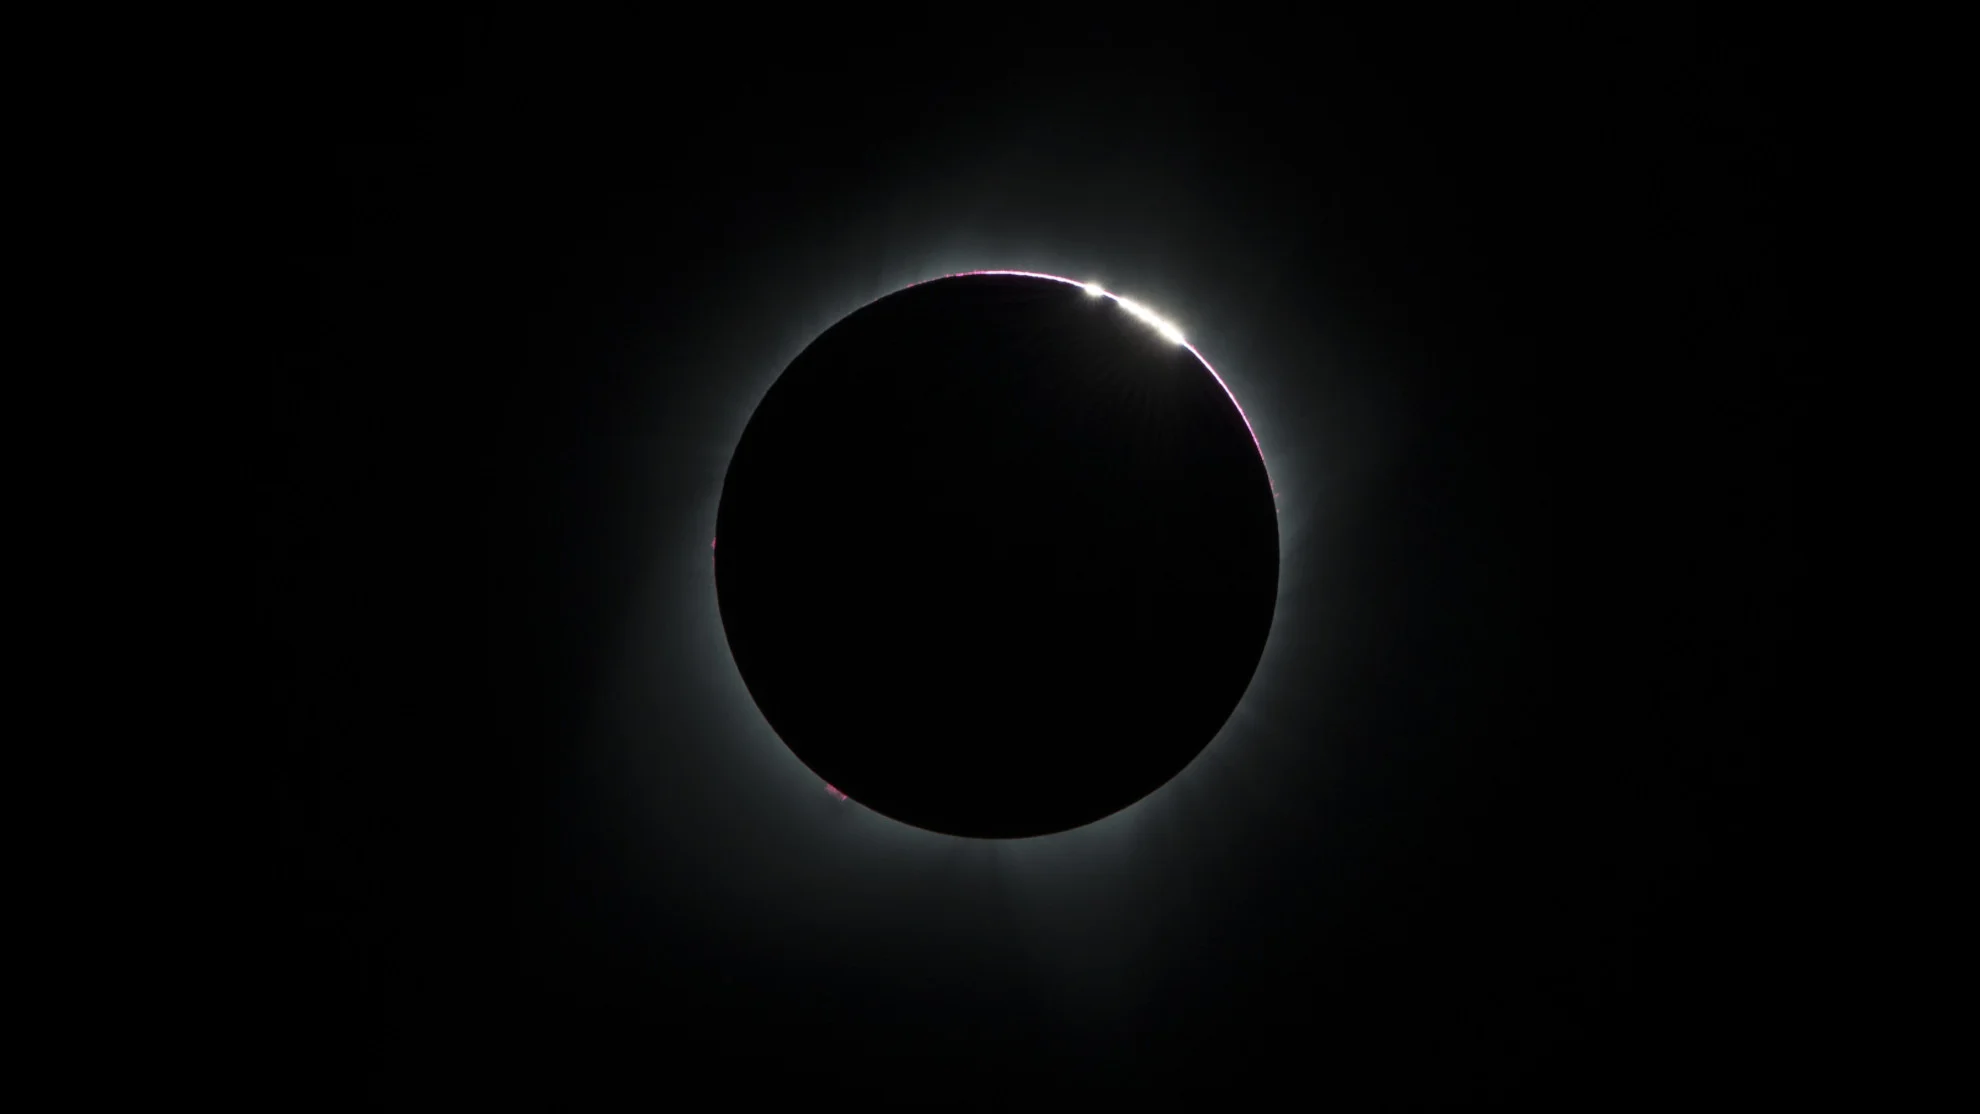 Totality, corona, Baily's beads: Do you know your solar eclipse terminology?